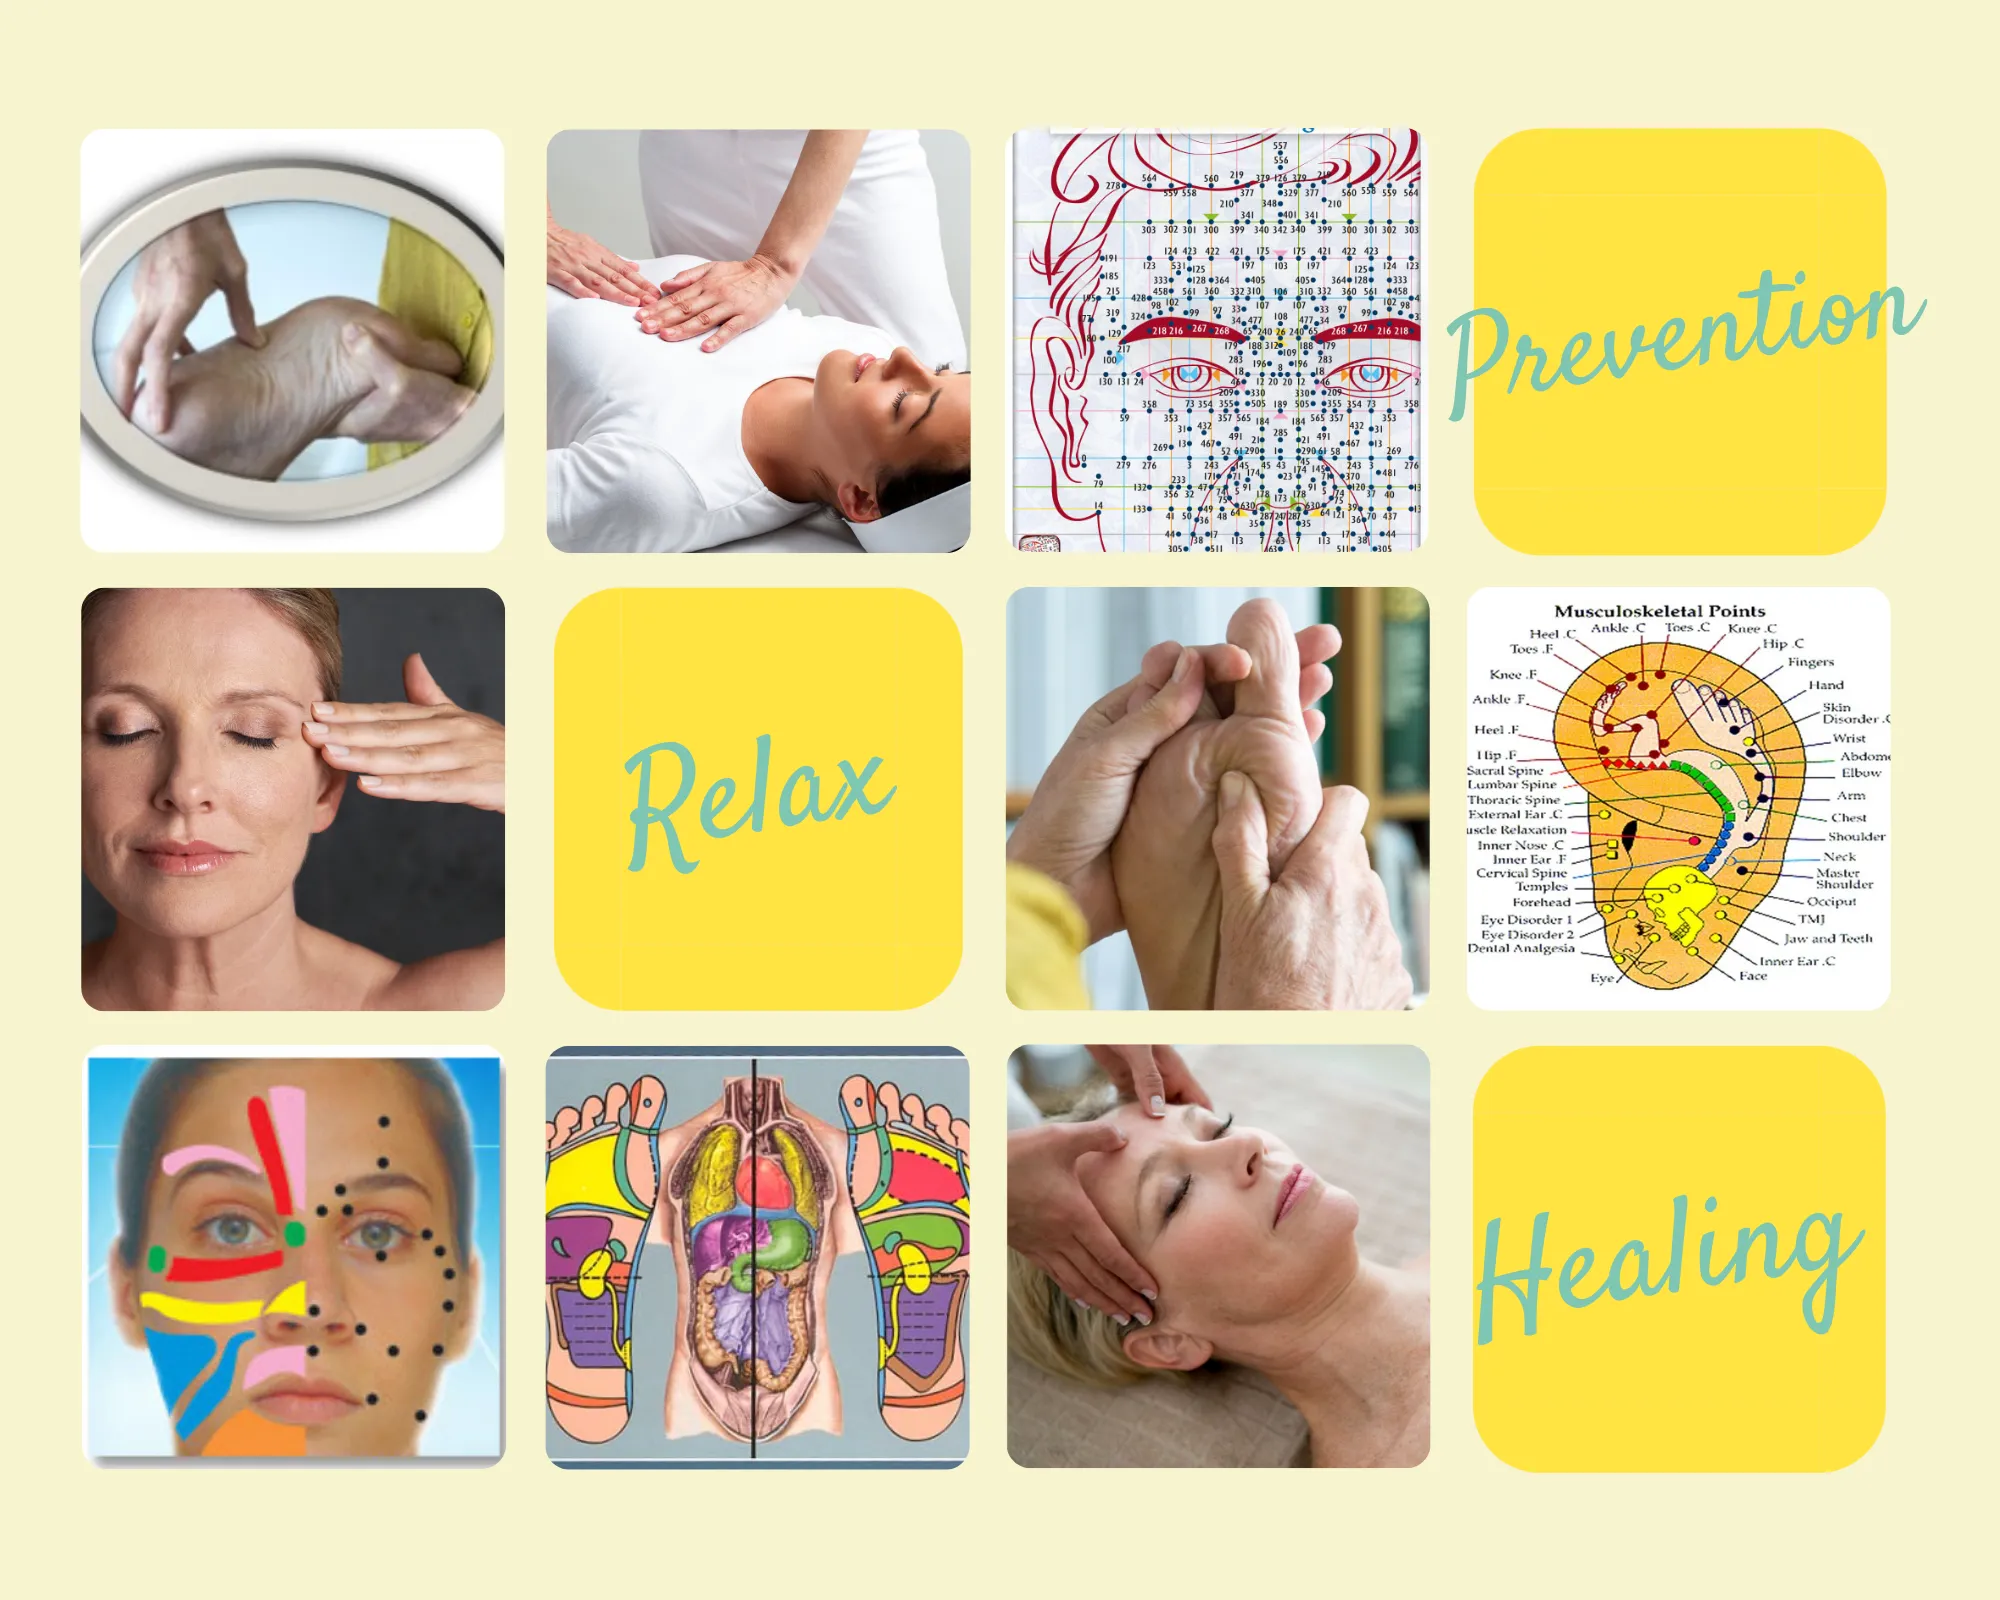 Reiki and Reflexology on feet, face, hands and ears